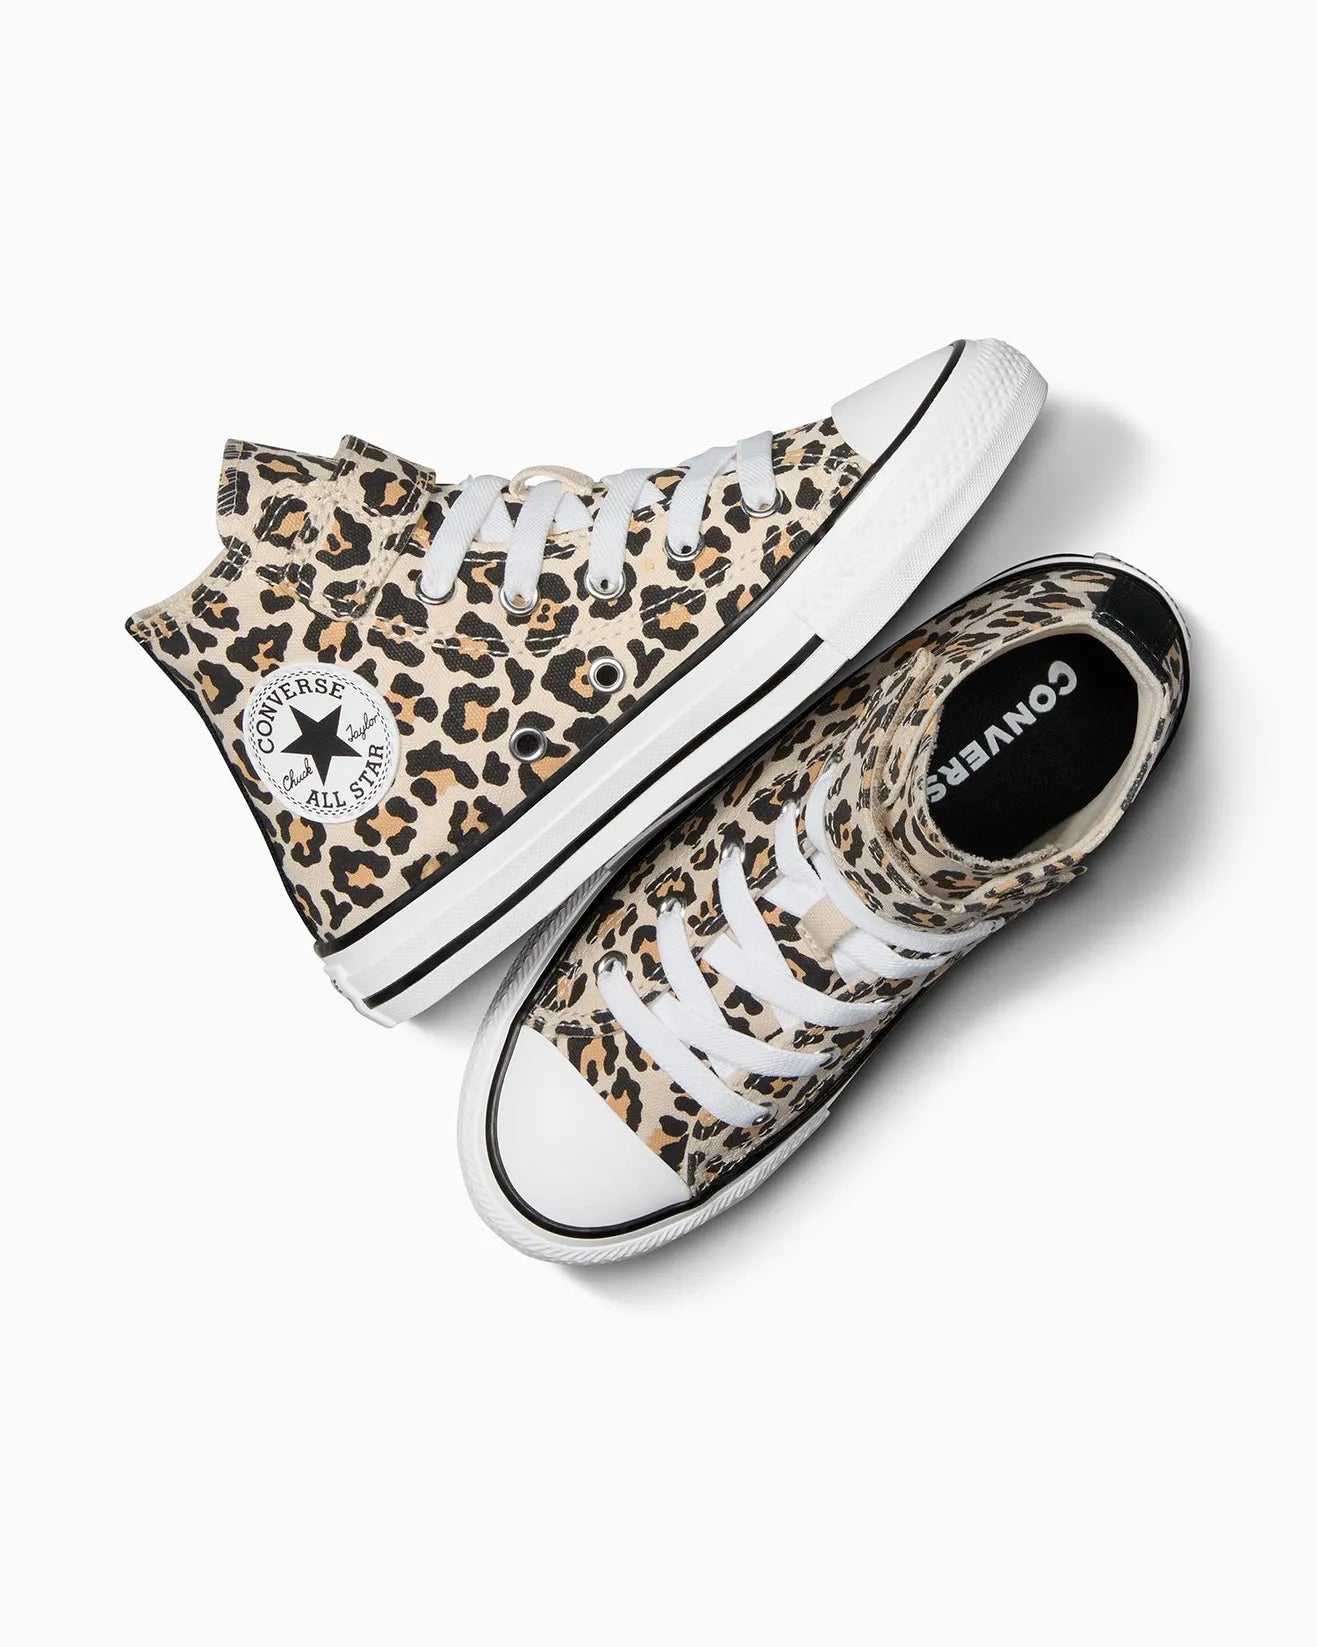 CONVERSE Chuck Taylor All Star Leopard Love 1V Youth Hi Shoe - Driftwood/Black/White